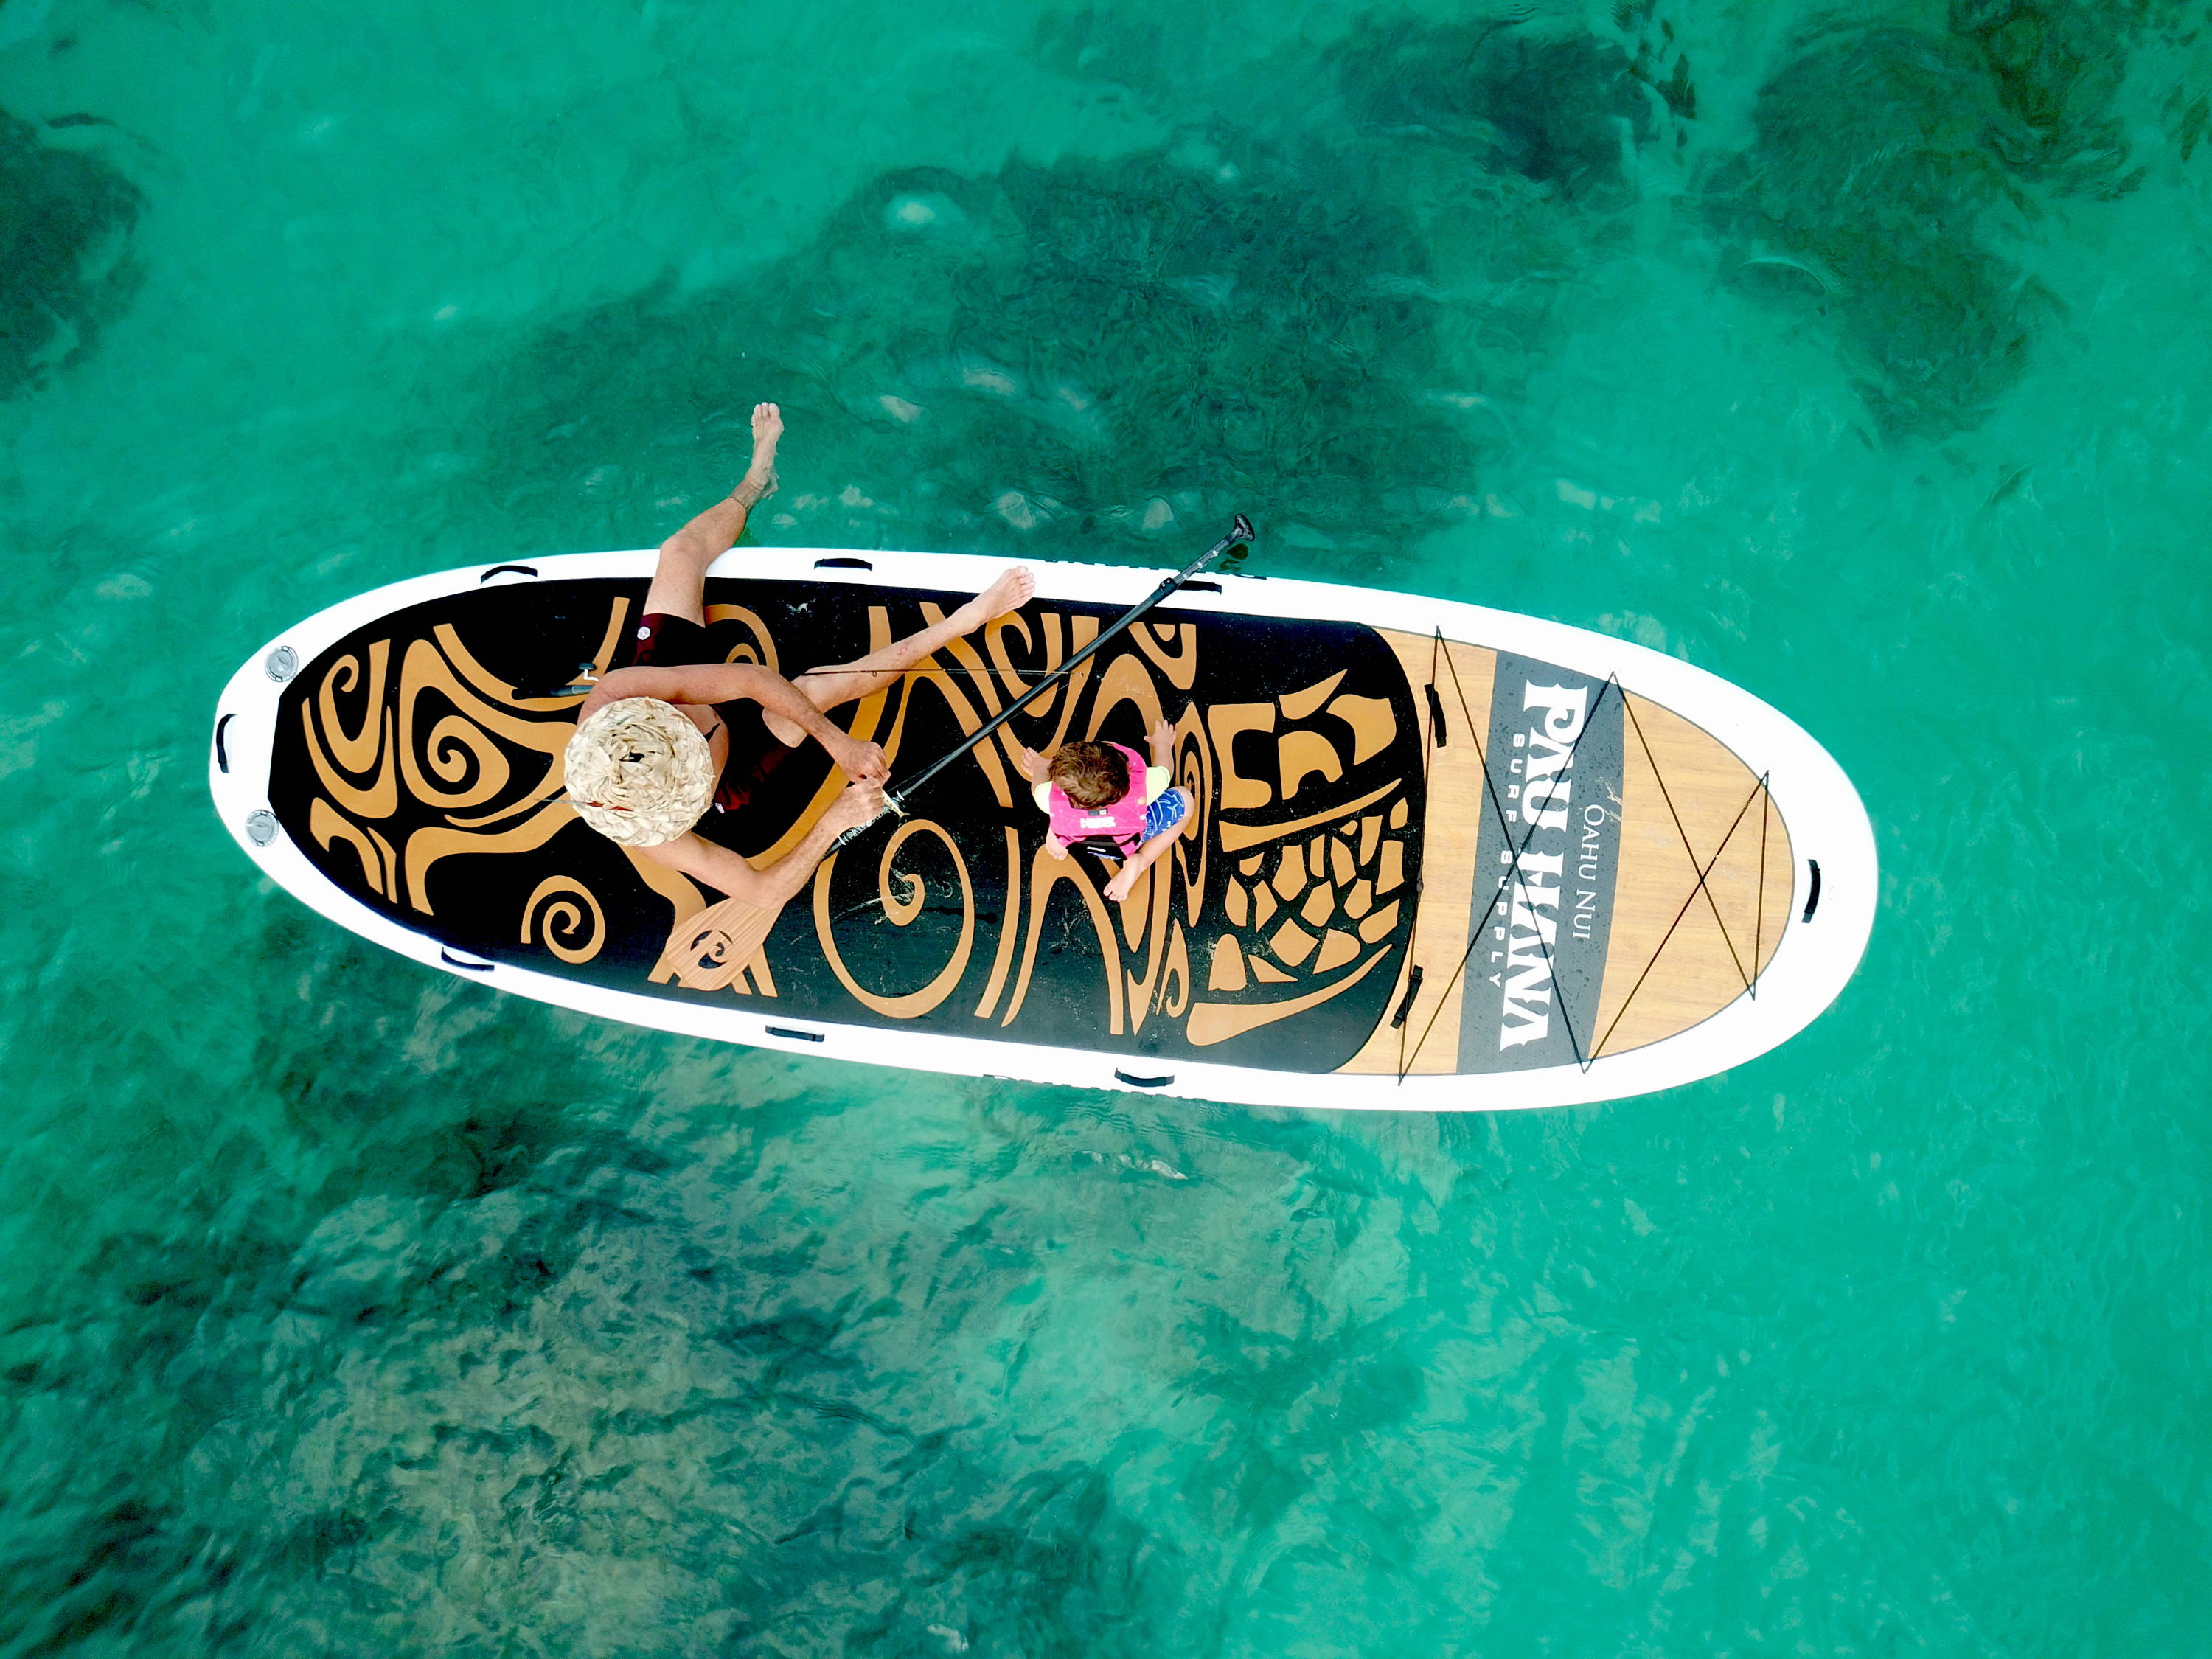 Oahu Nui Giant stand up paddle board supsquatch